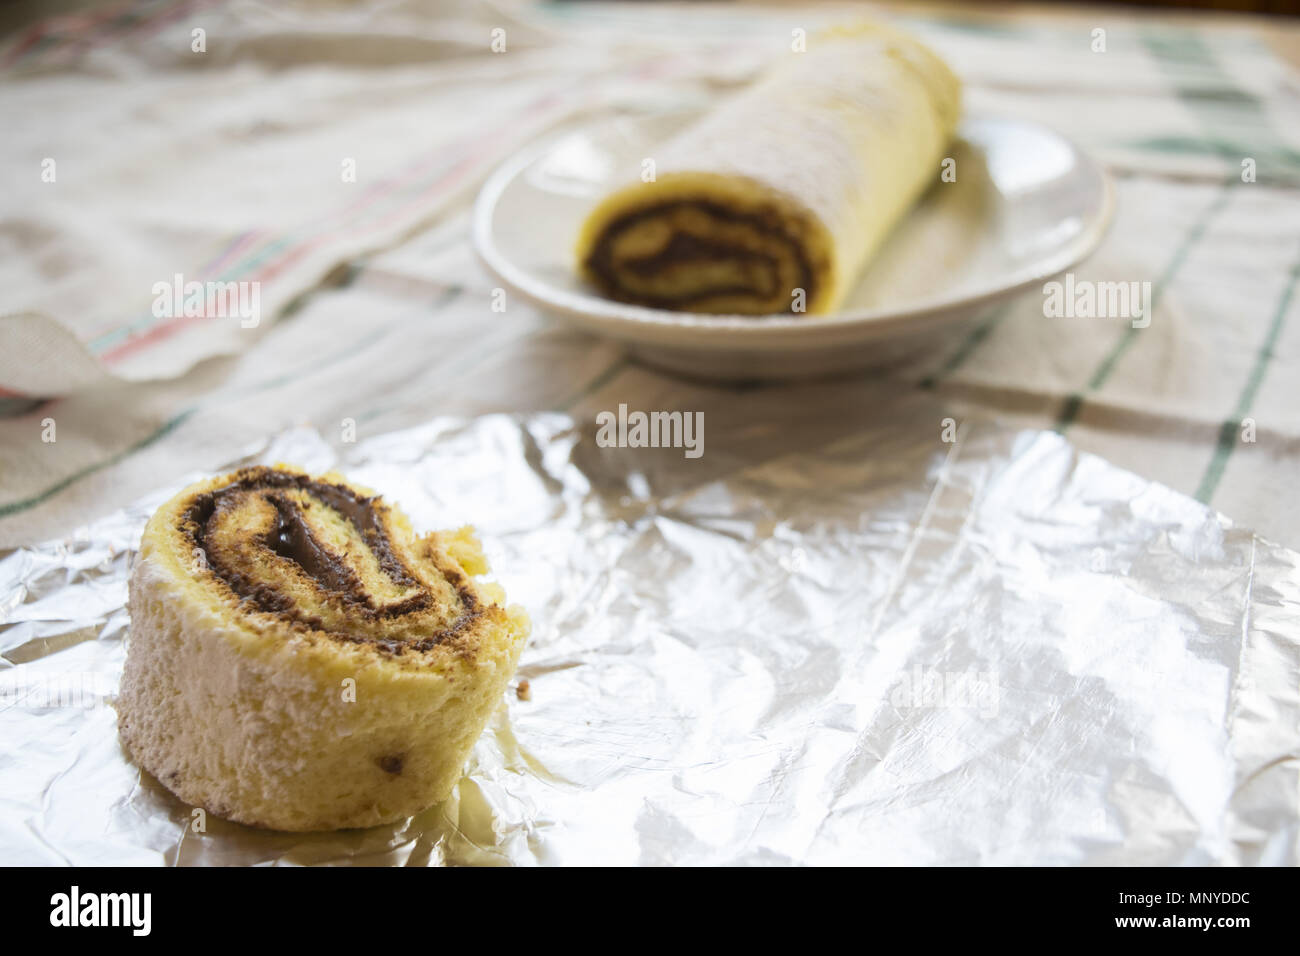 Swiss roll with melted chocolate filling Stock Photo